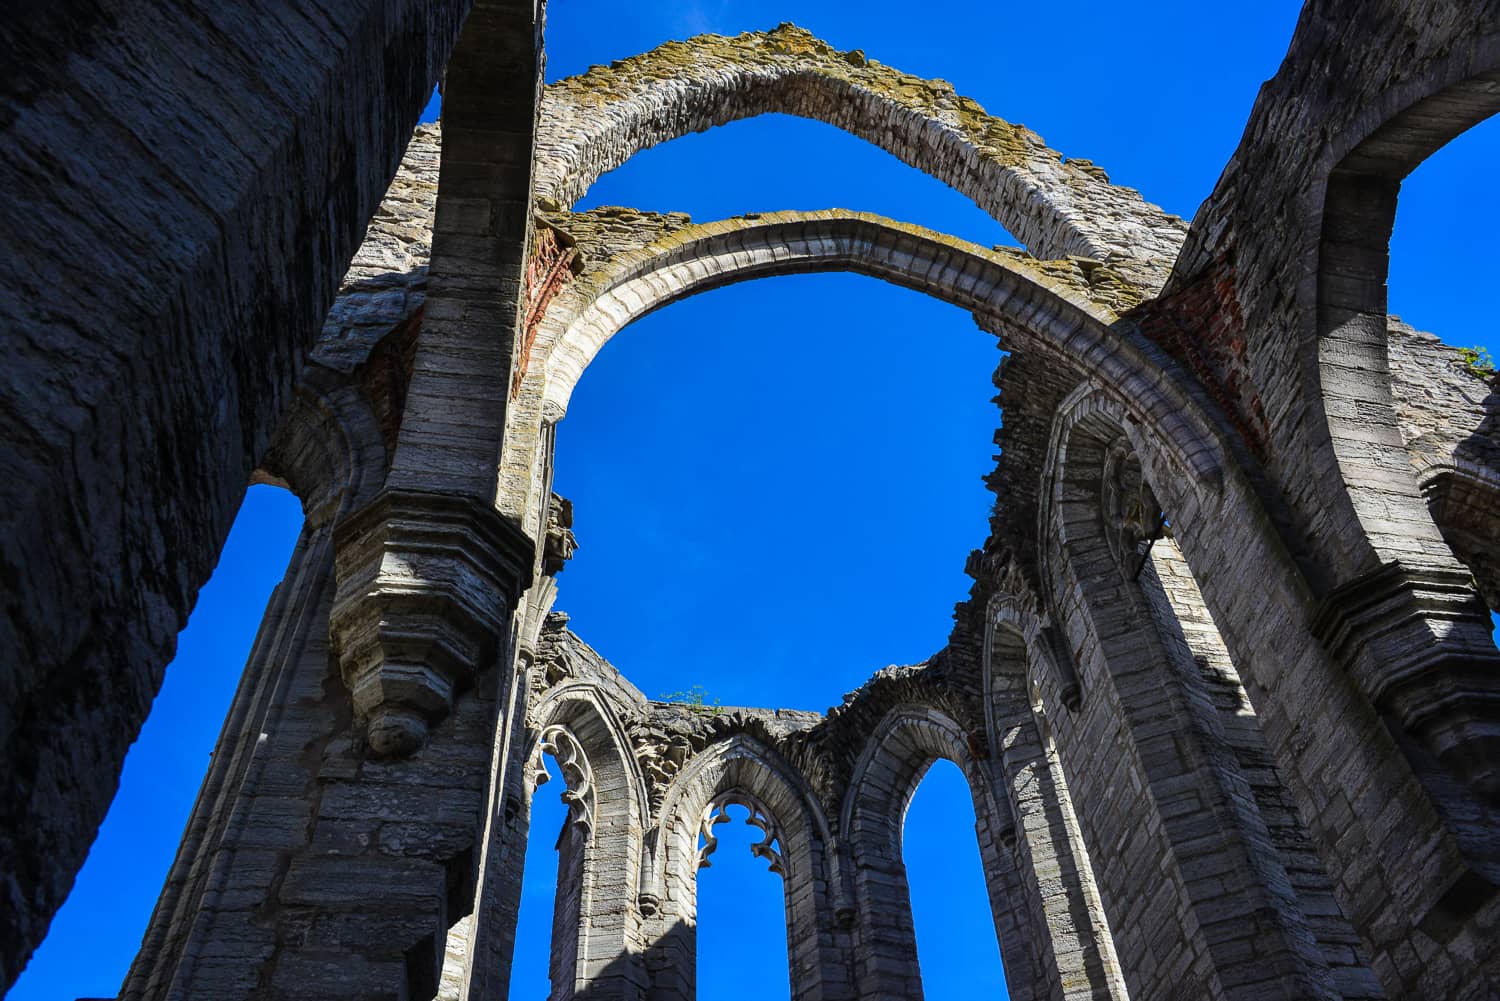 This cathedral was abandoned centuries ago.